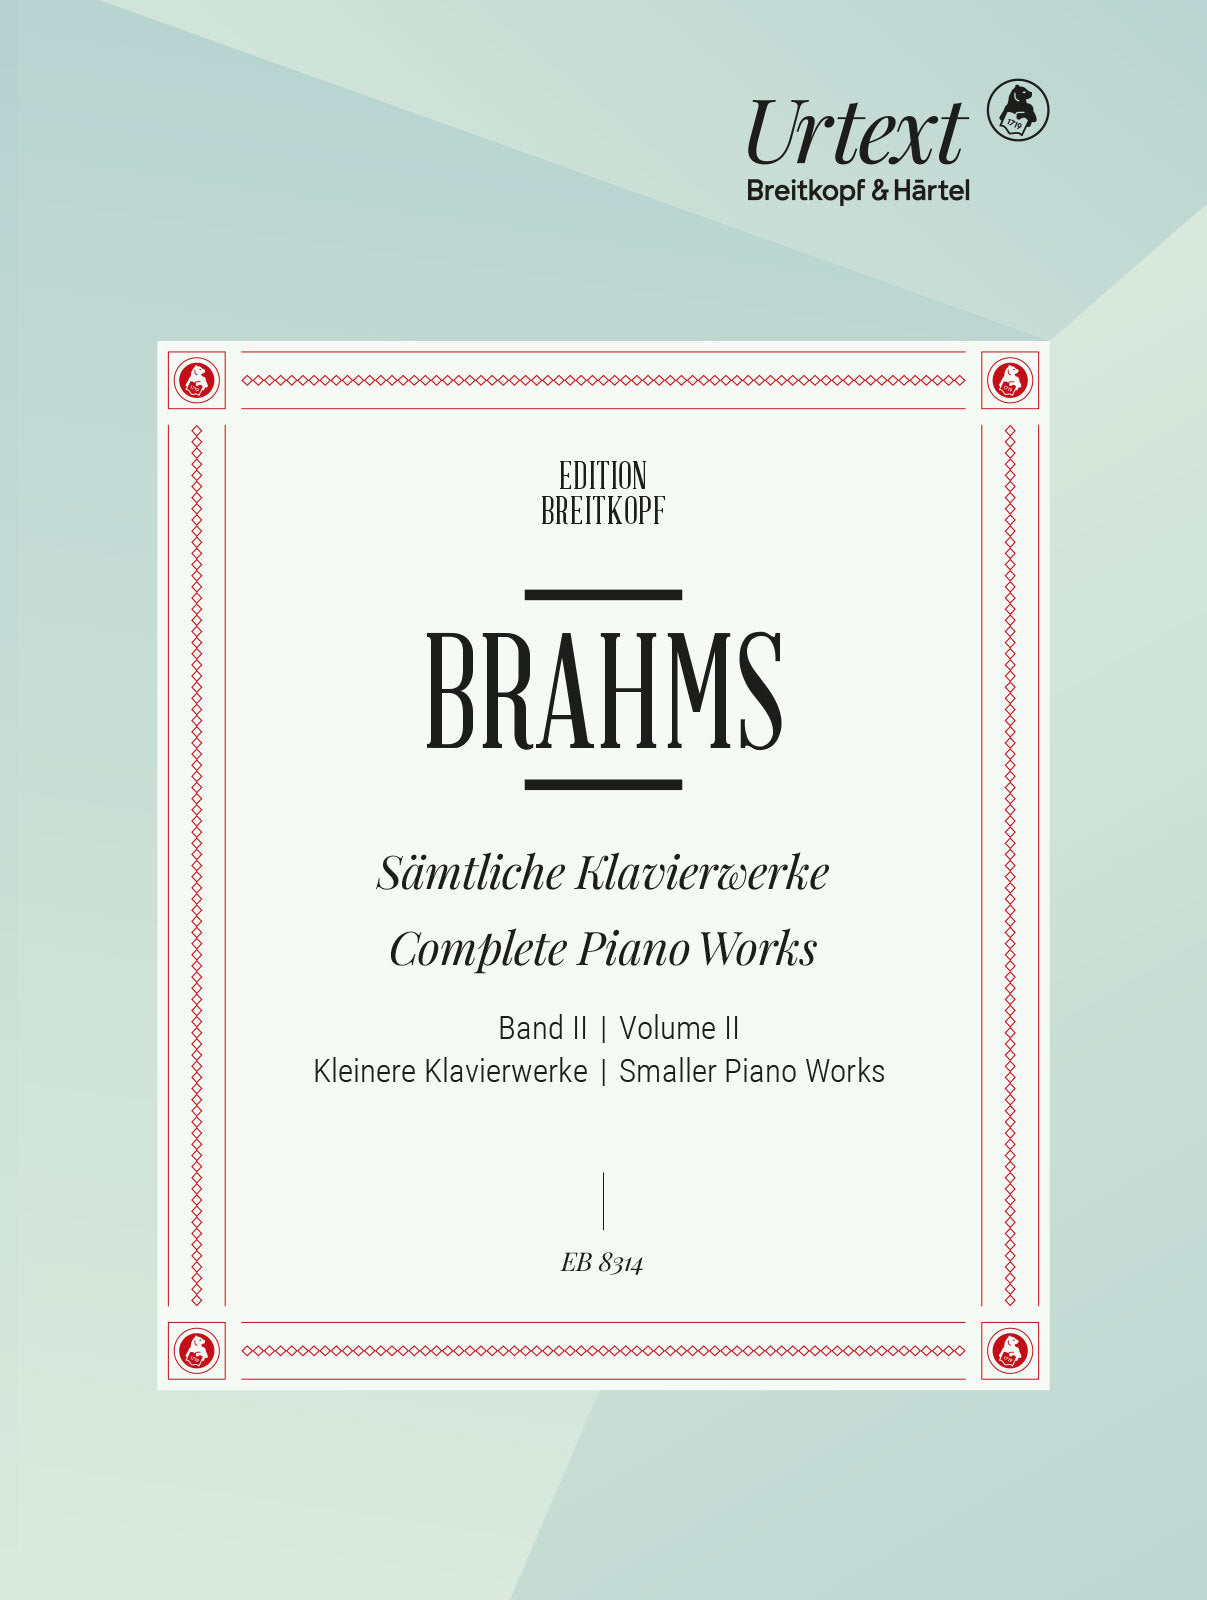 Brahms: Complete Piano Works - Volume 2 (Shorter Piano Pieces)